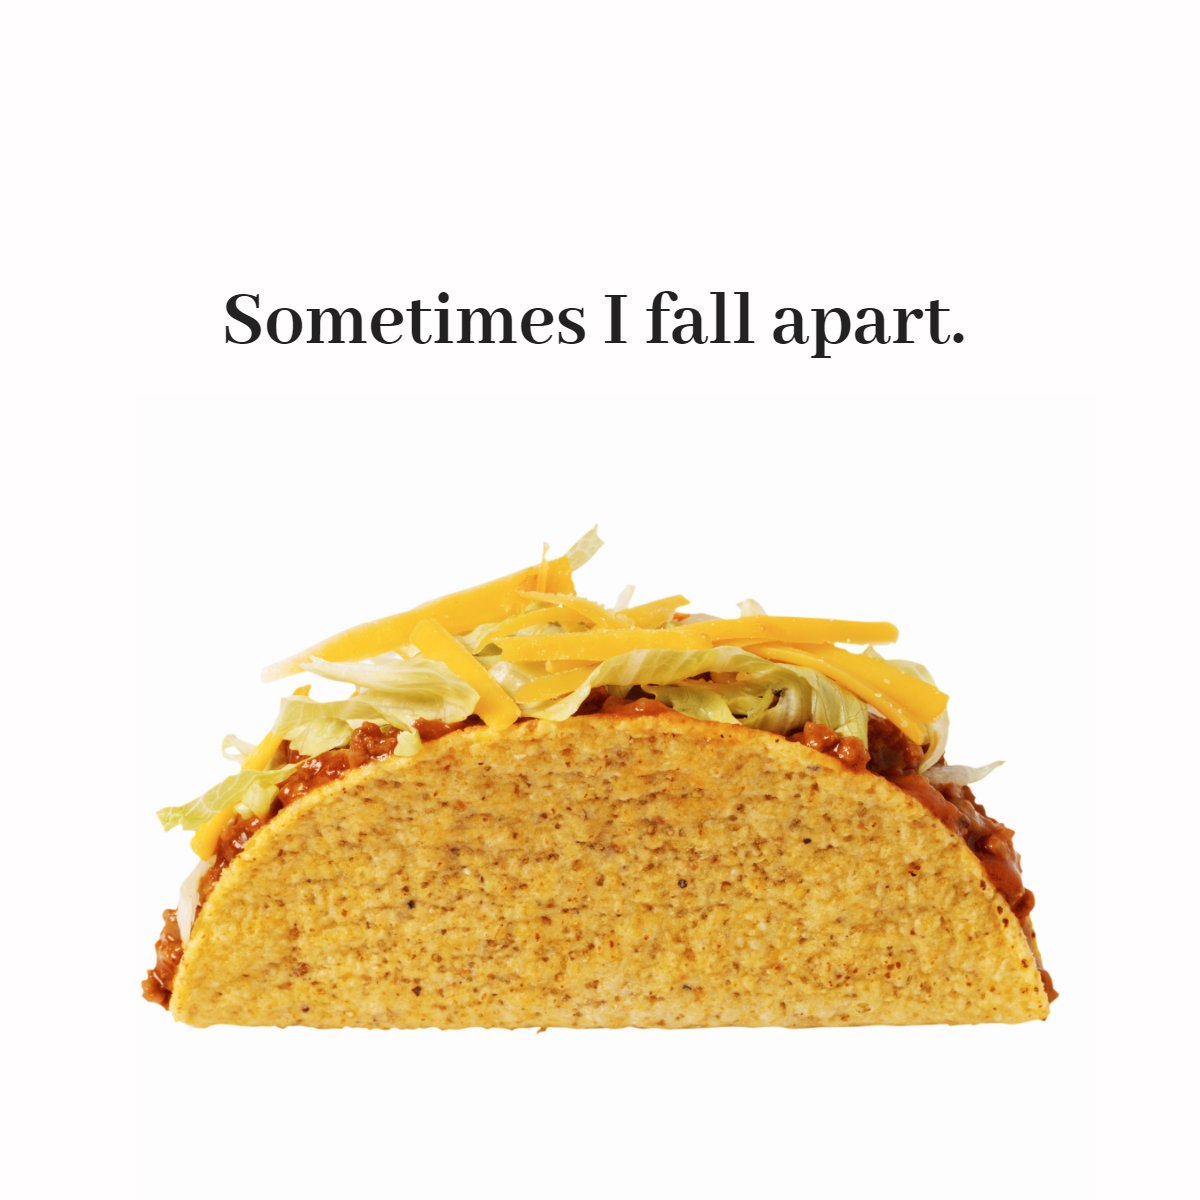 It’s ok if you fall apart sometimes.

Tacos fall apart and we still love them.🌮❤️

#itsokay #fun #funnyinspo #taco #tacolover #instaquotes
 #beyondhomesales #homesforsale #whatsmyhomeworth #realestate #realestateagent #Realtor #sellinghomes #buyinghomes